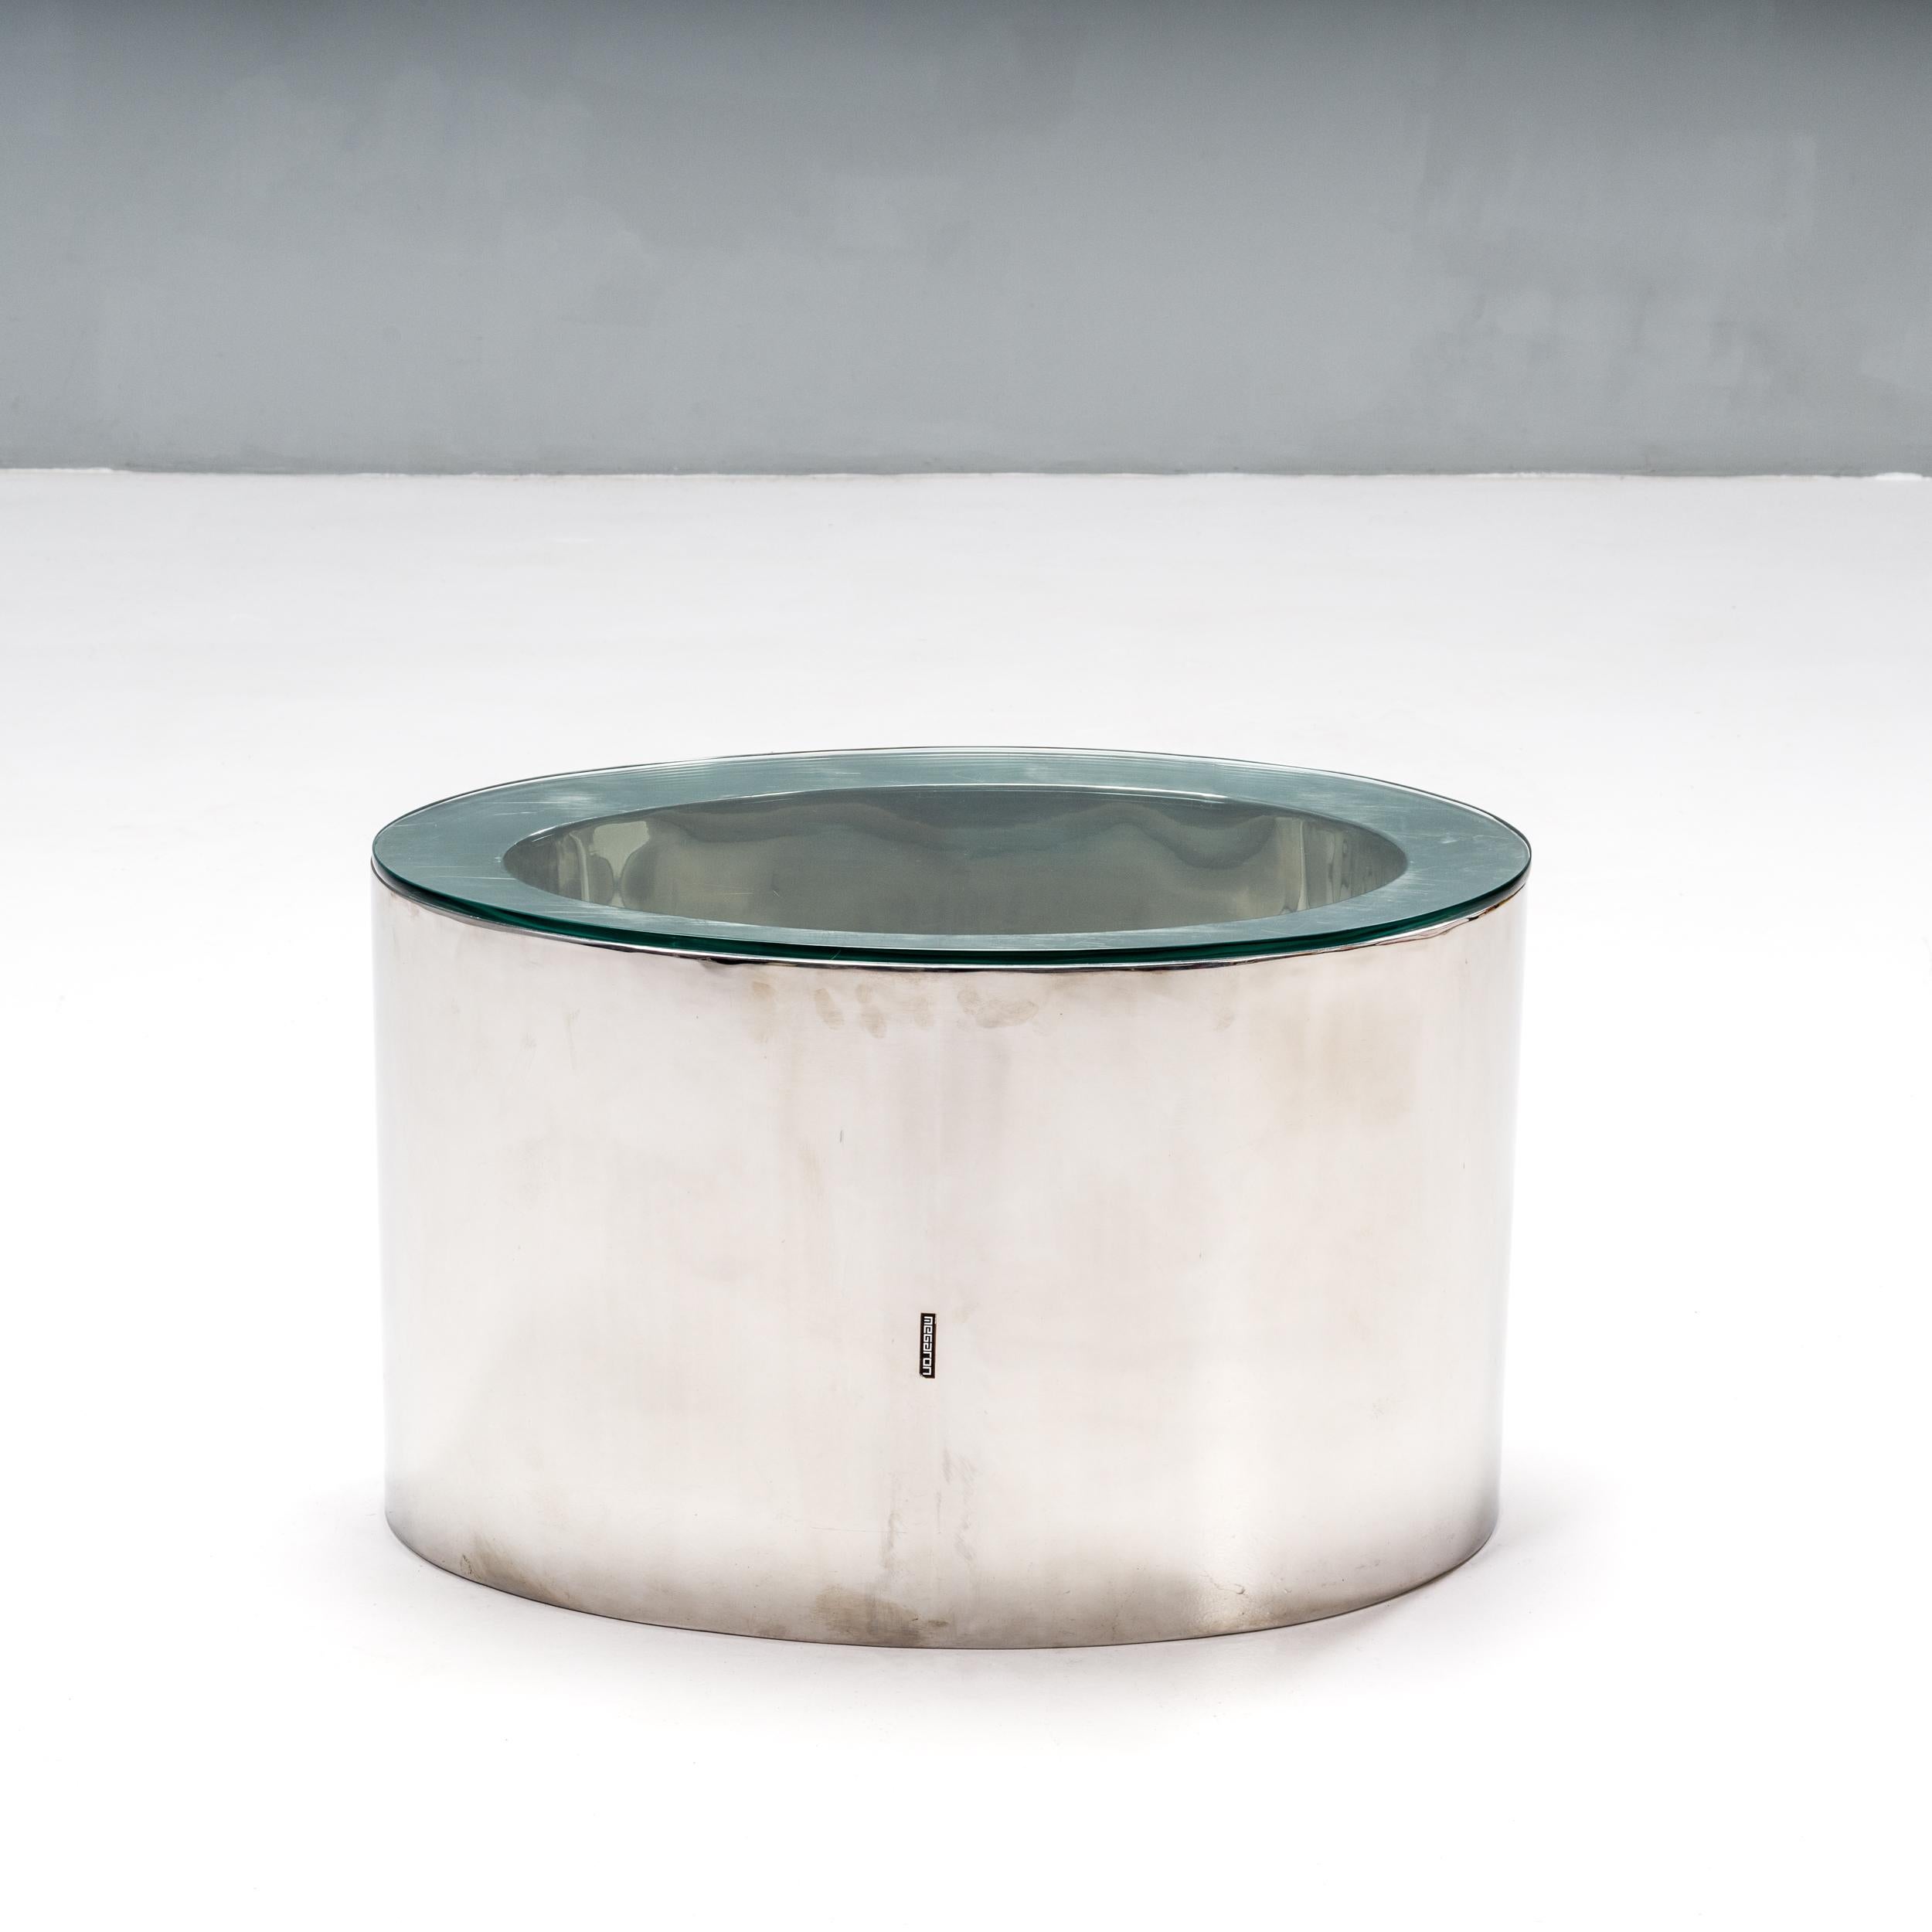 A fantastic example of modern design, the Pebble coffee table was designed by Derya Akdurak for Megaron.

Constructed from a polished chrome base, the table has a smooth, oval shape with a hollowed out centre.

A clear glass top creates the